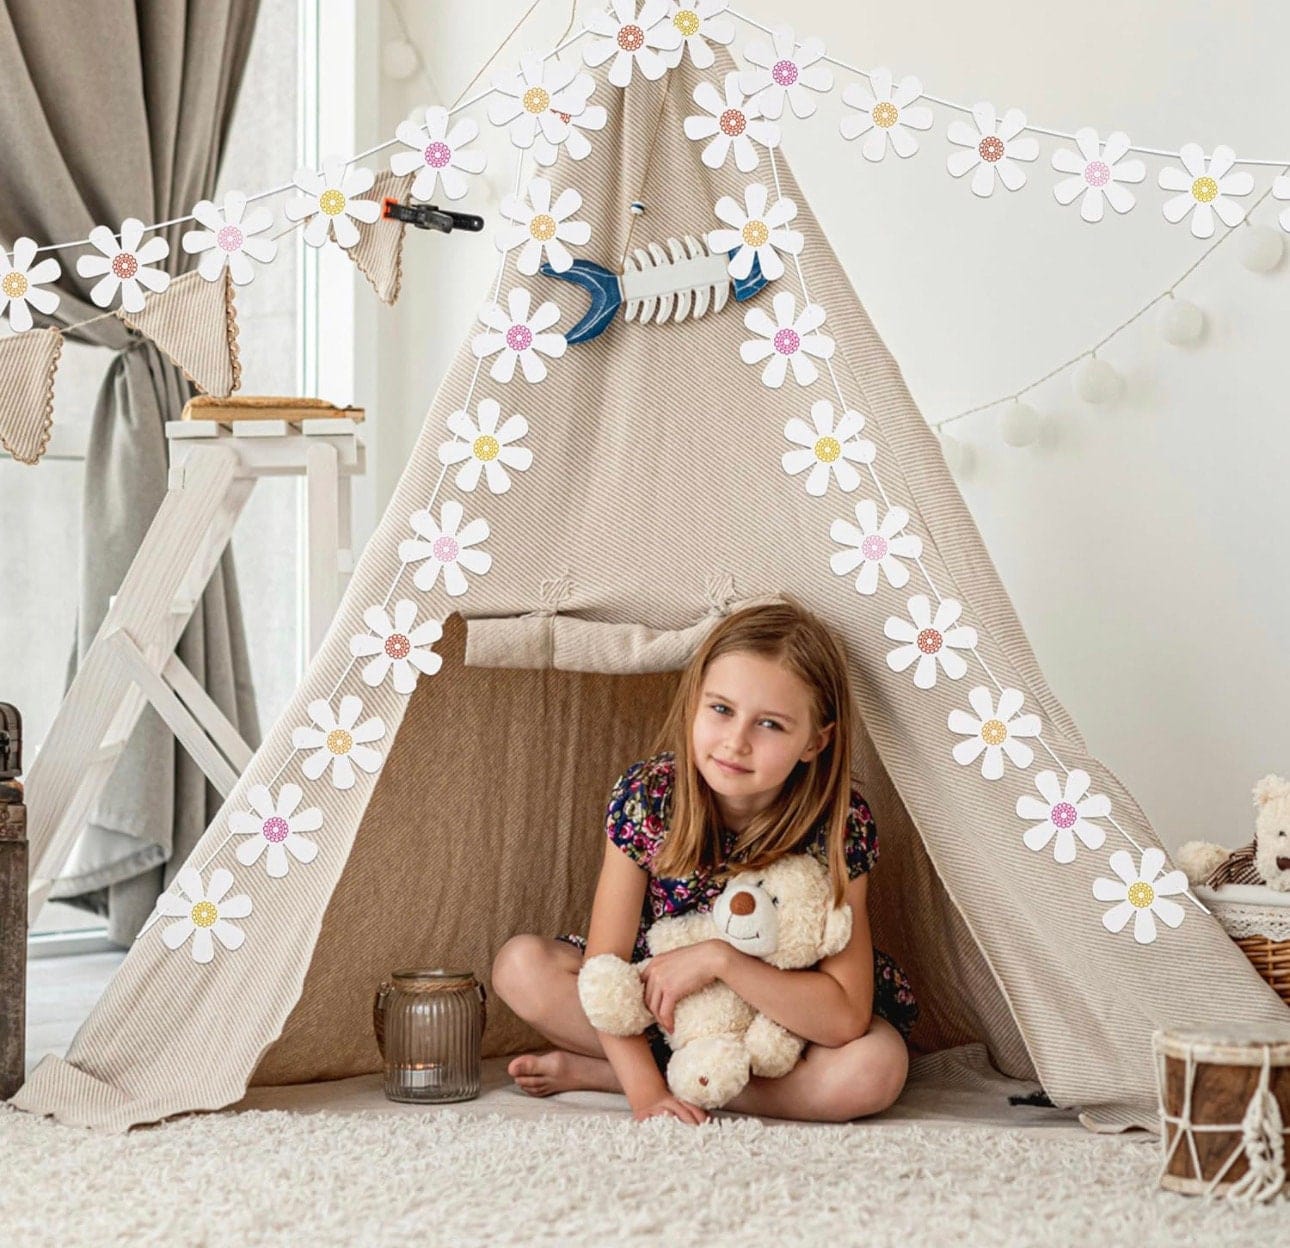 white daisy garland hanging over girl sitting in a tee pee